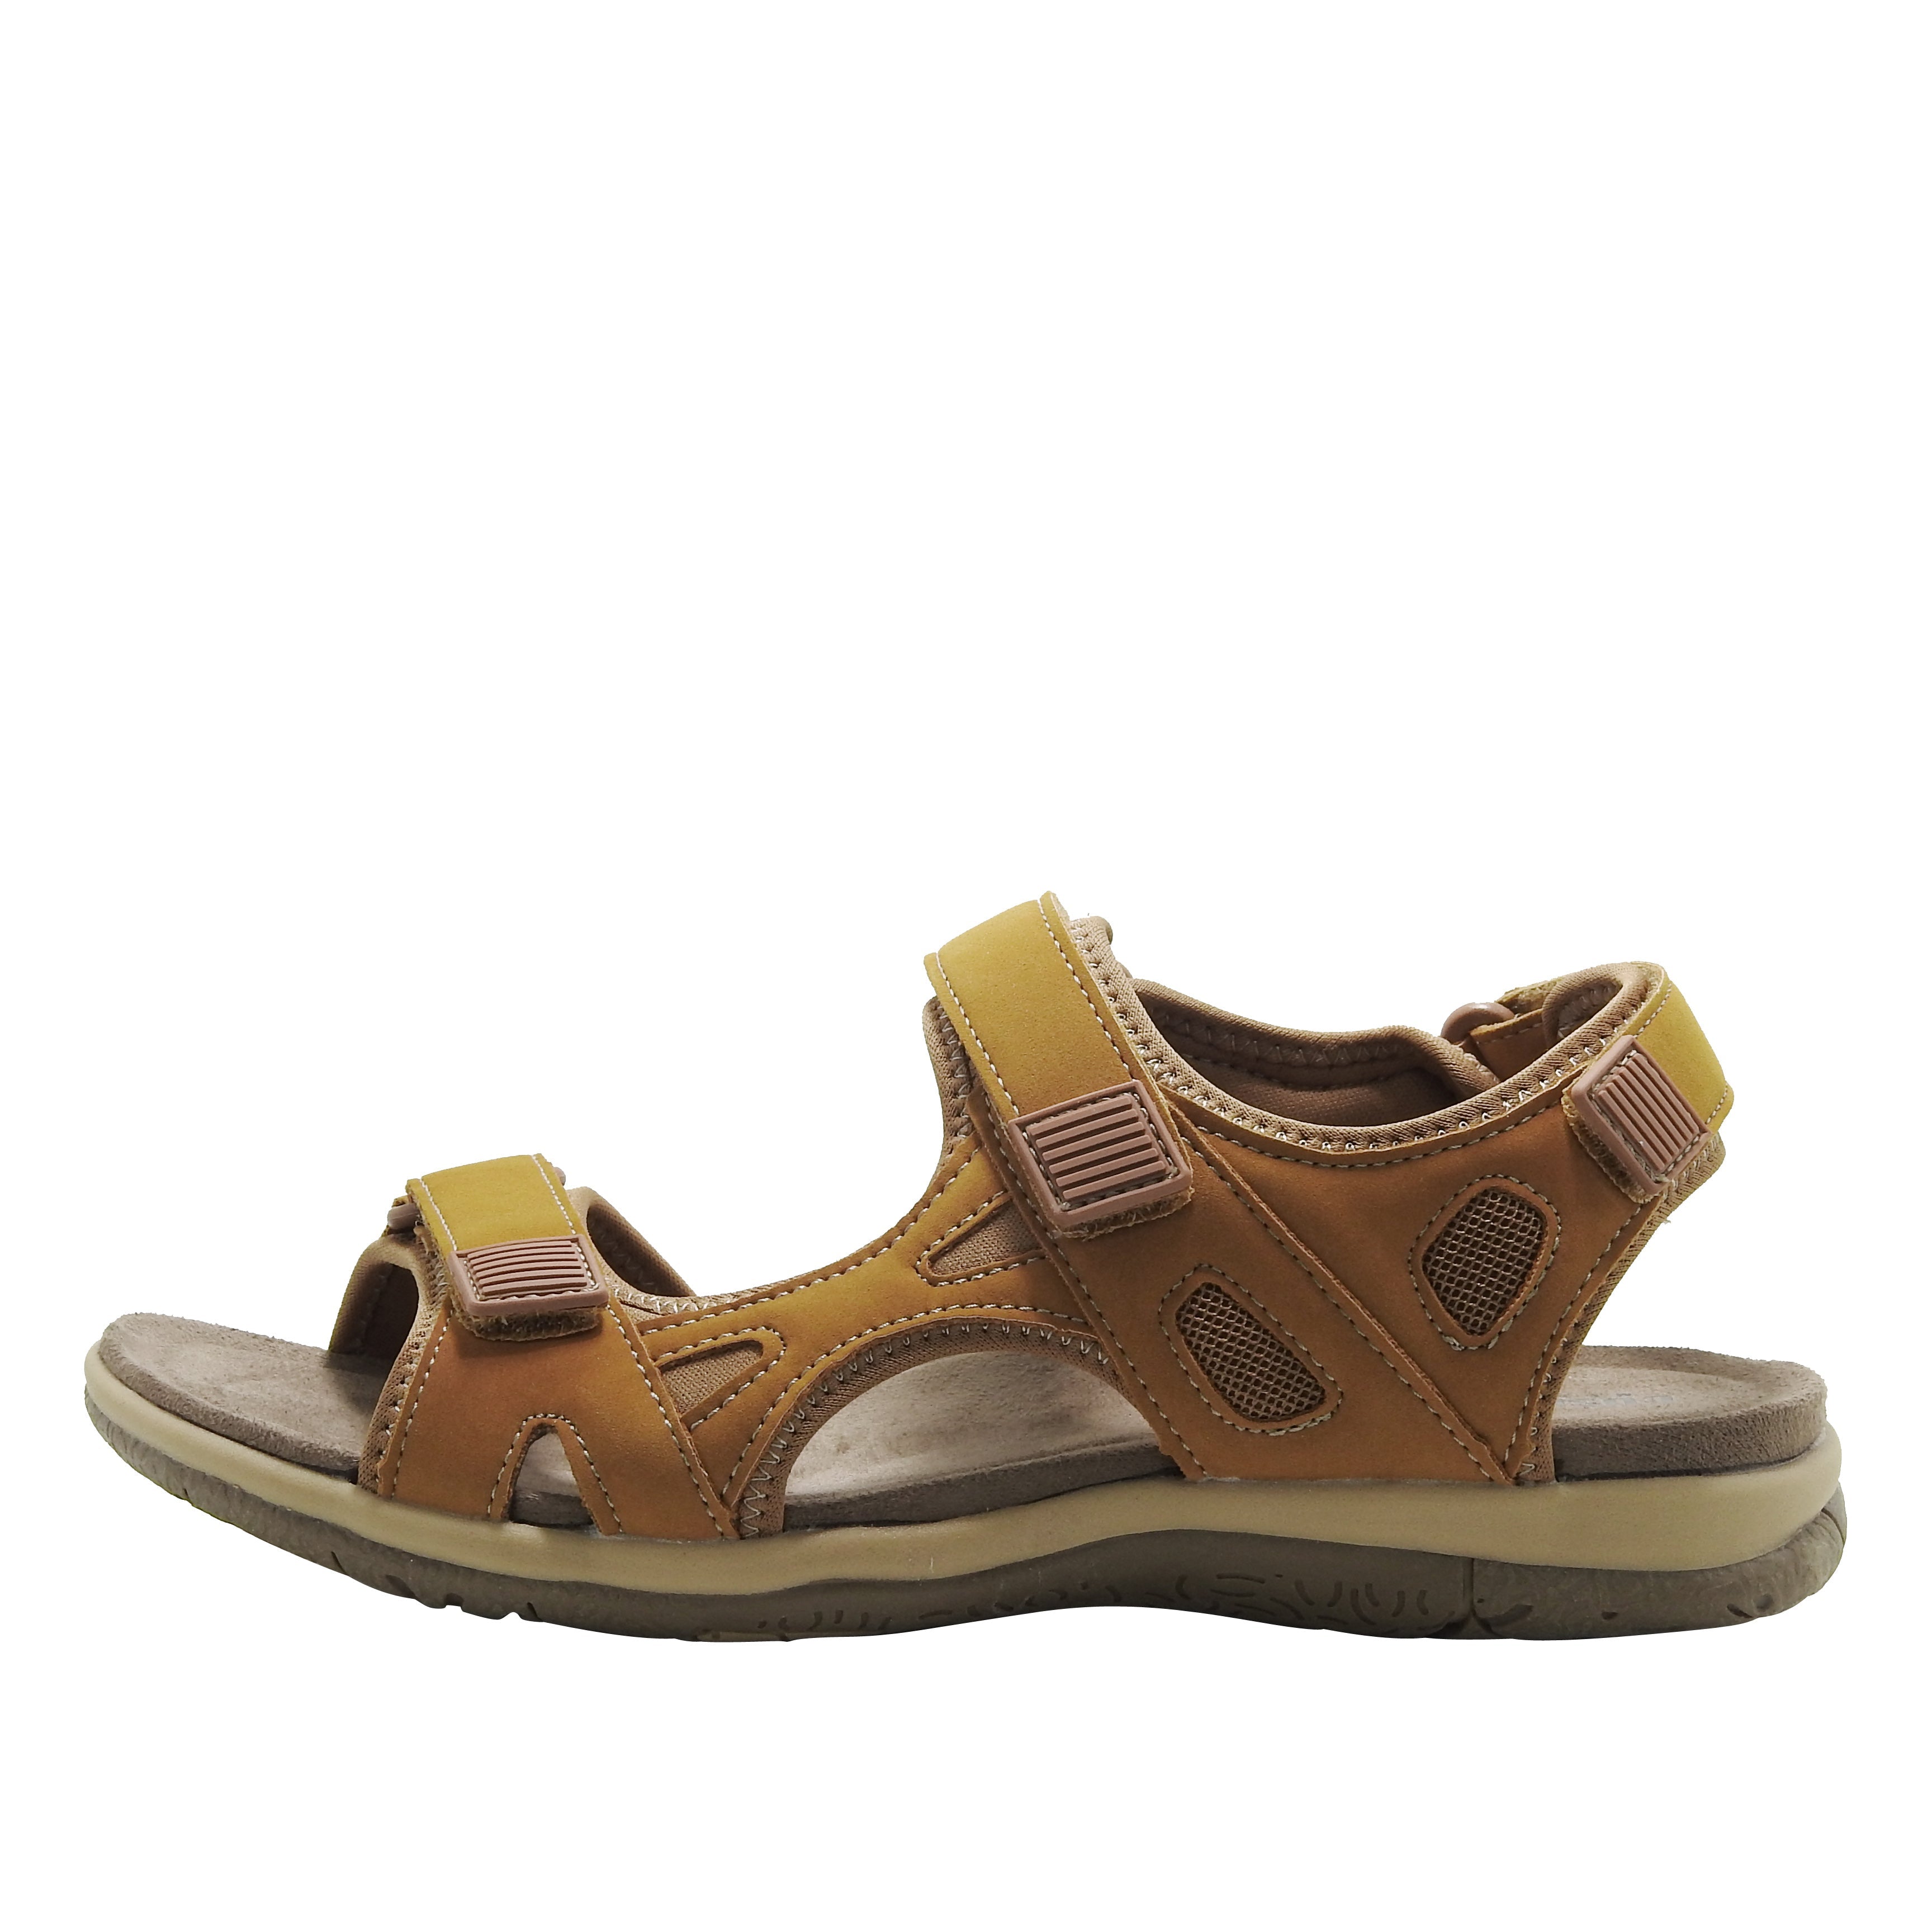 Pace Comfort Sandal Brights